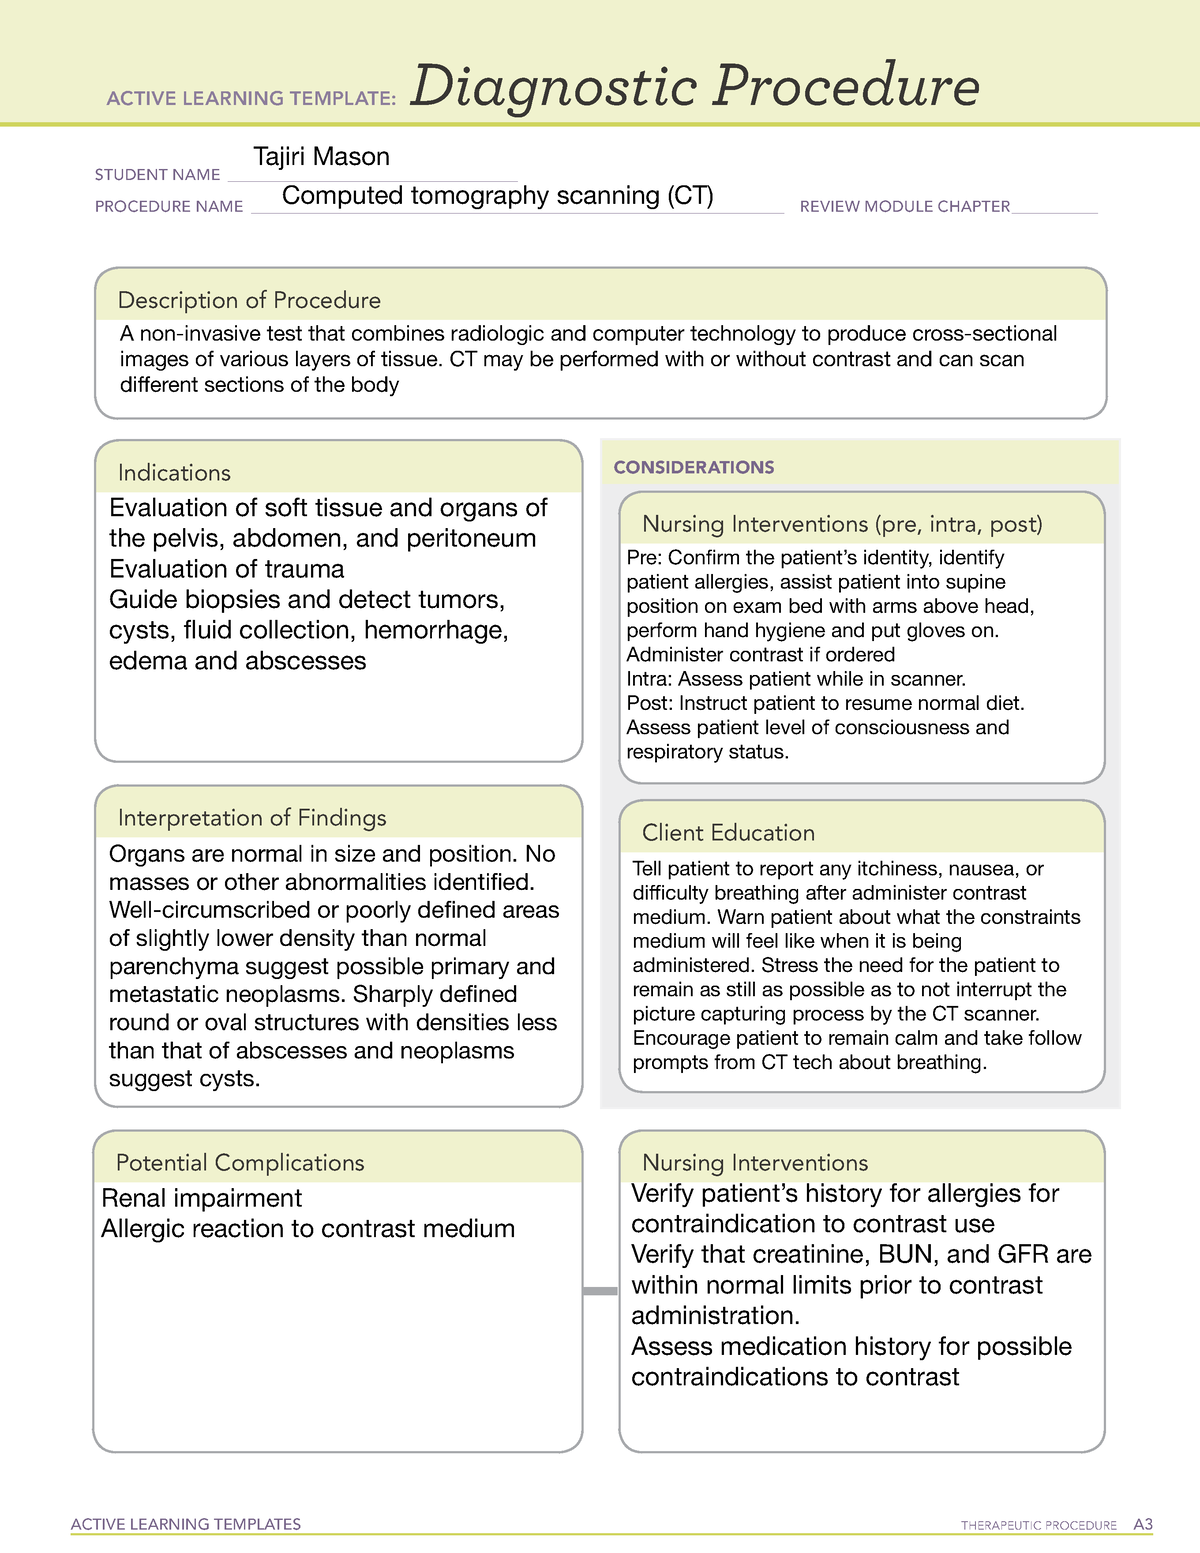 ct-scan-ati-template-active-learning-templates-therapeutic